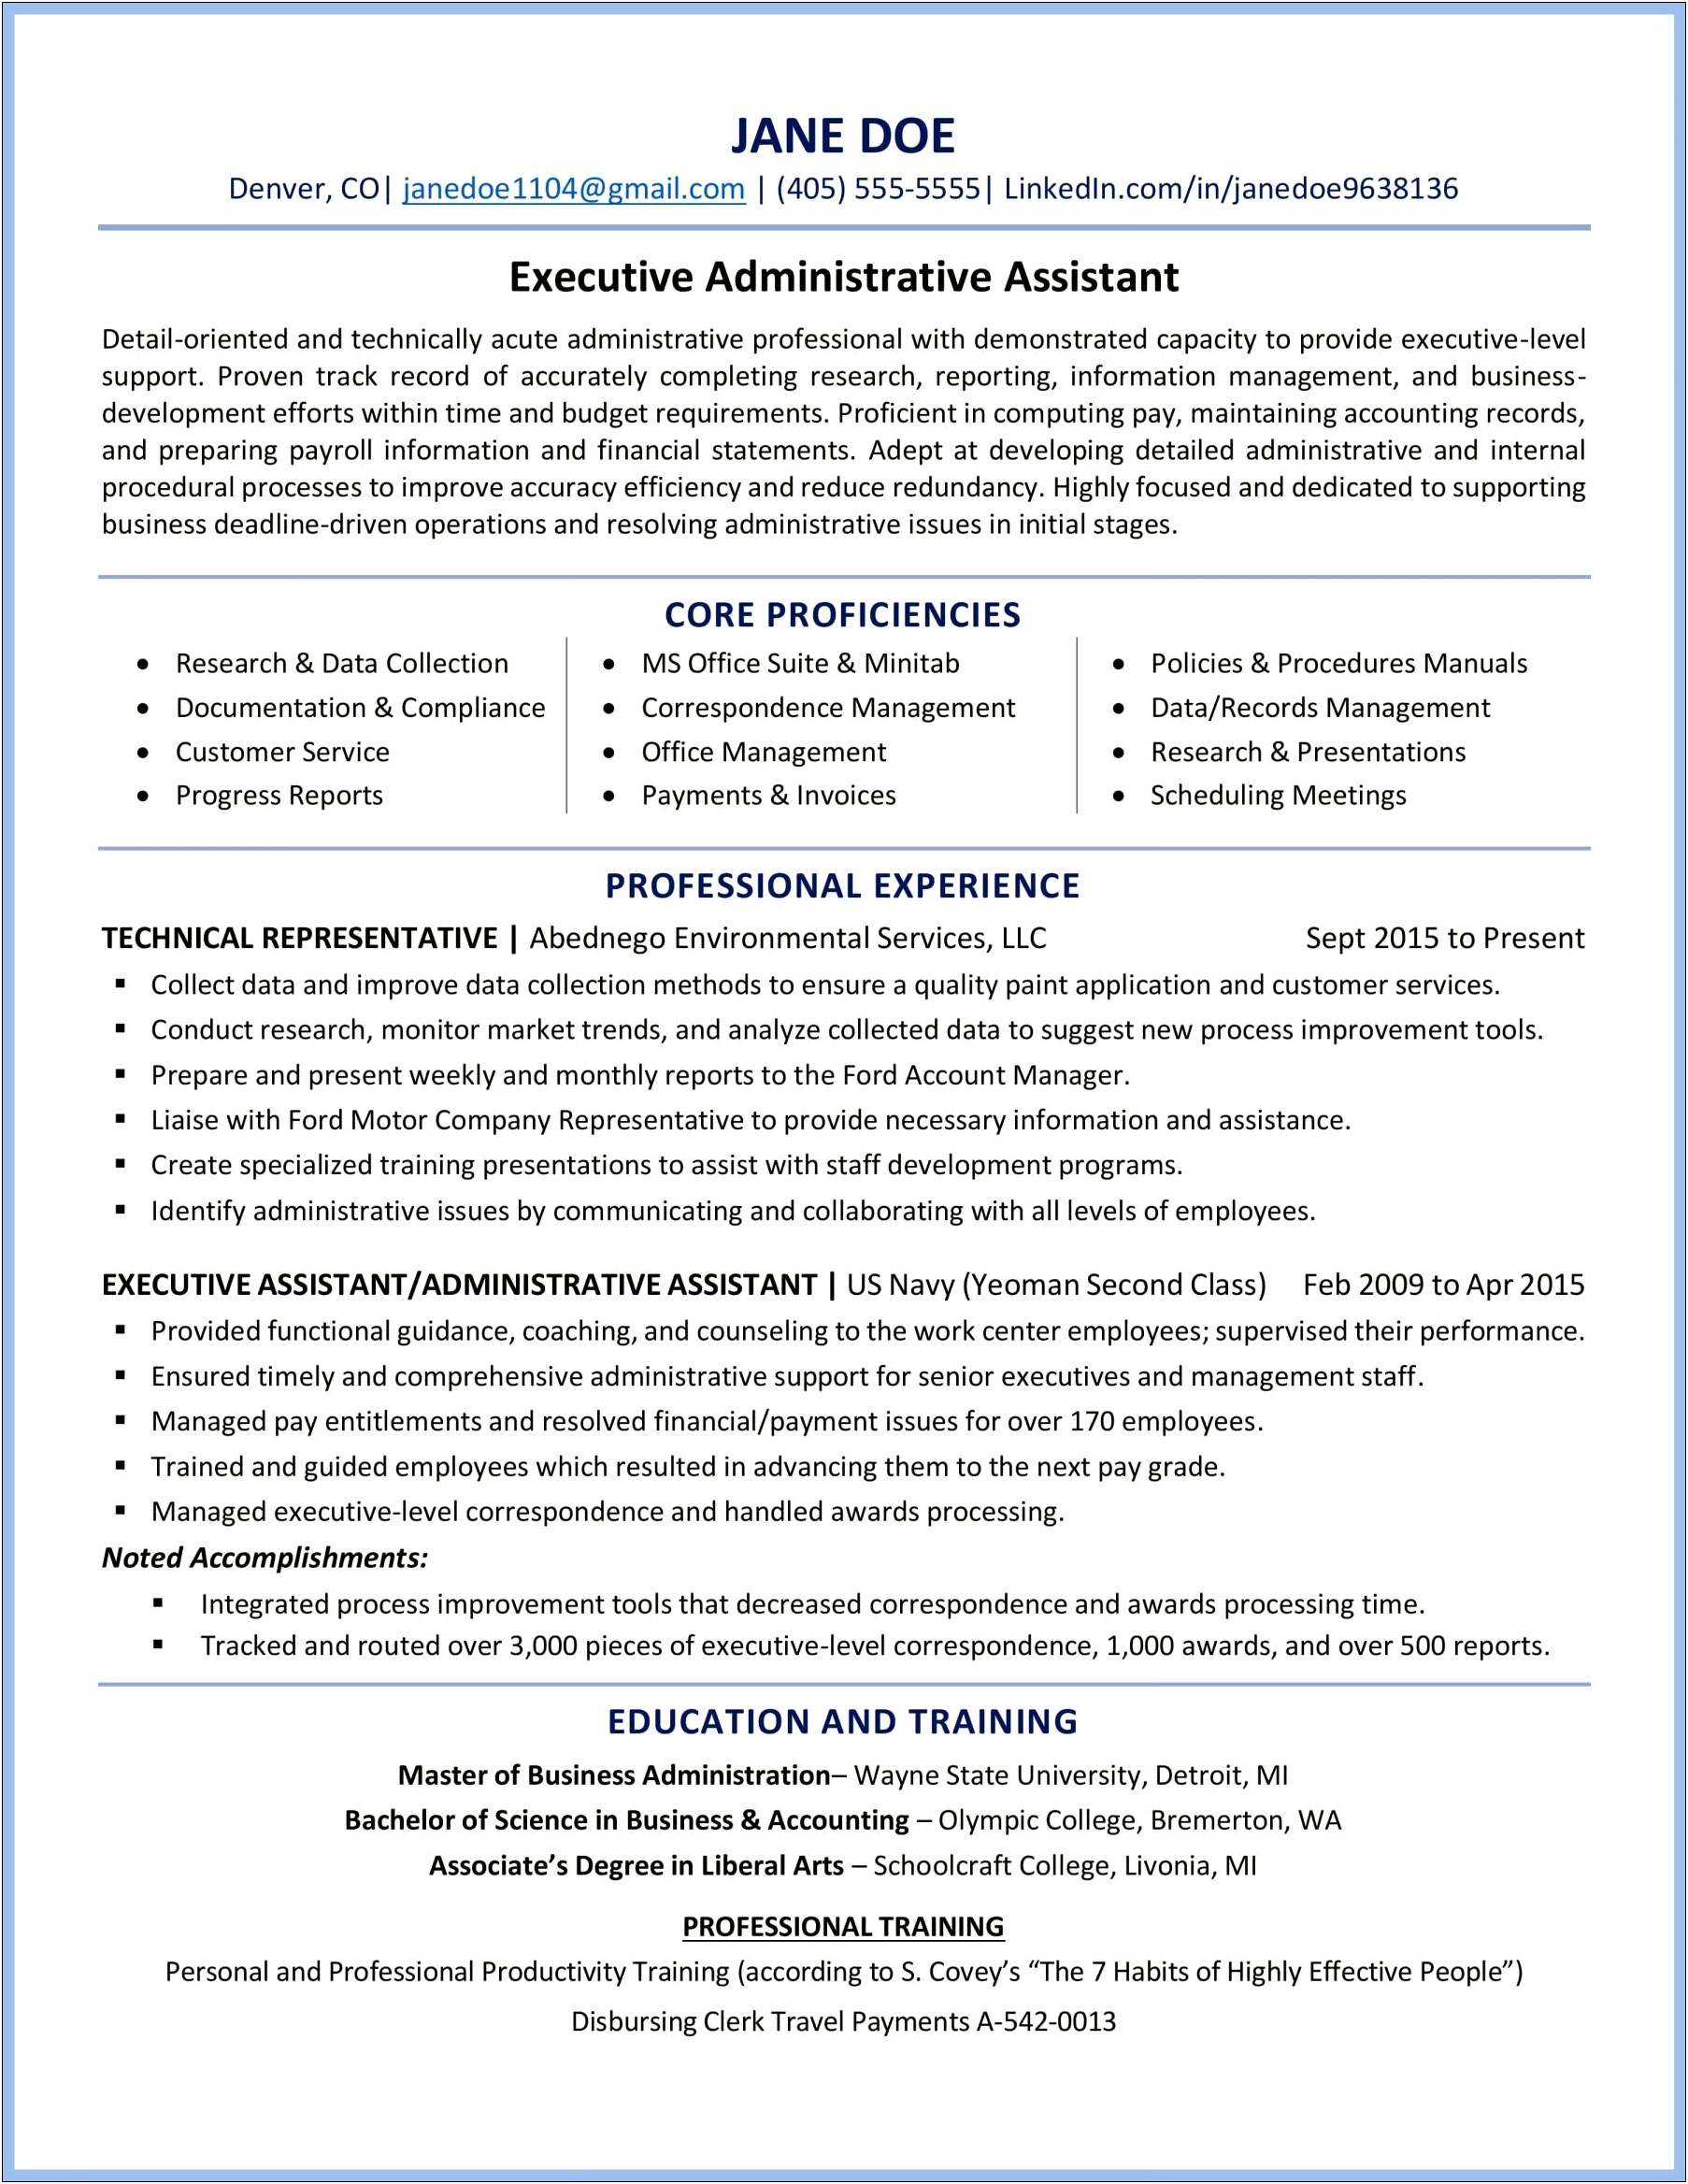 Executive Assistant Resume Summary Of Qualifications